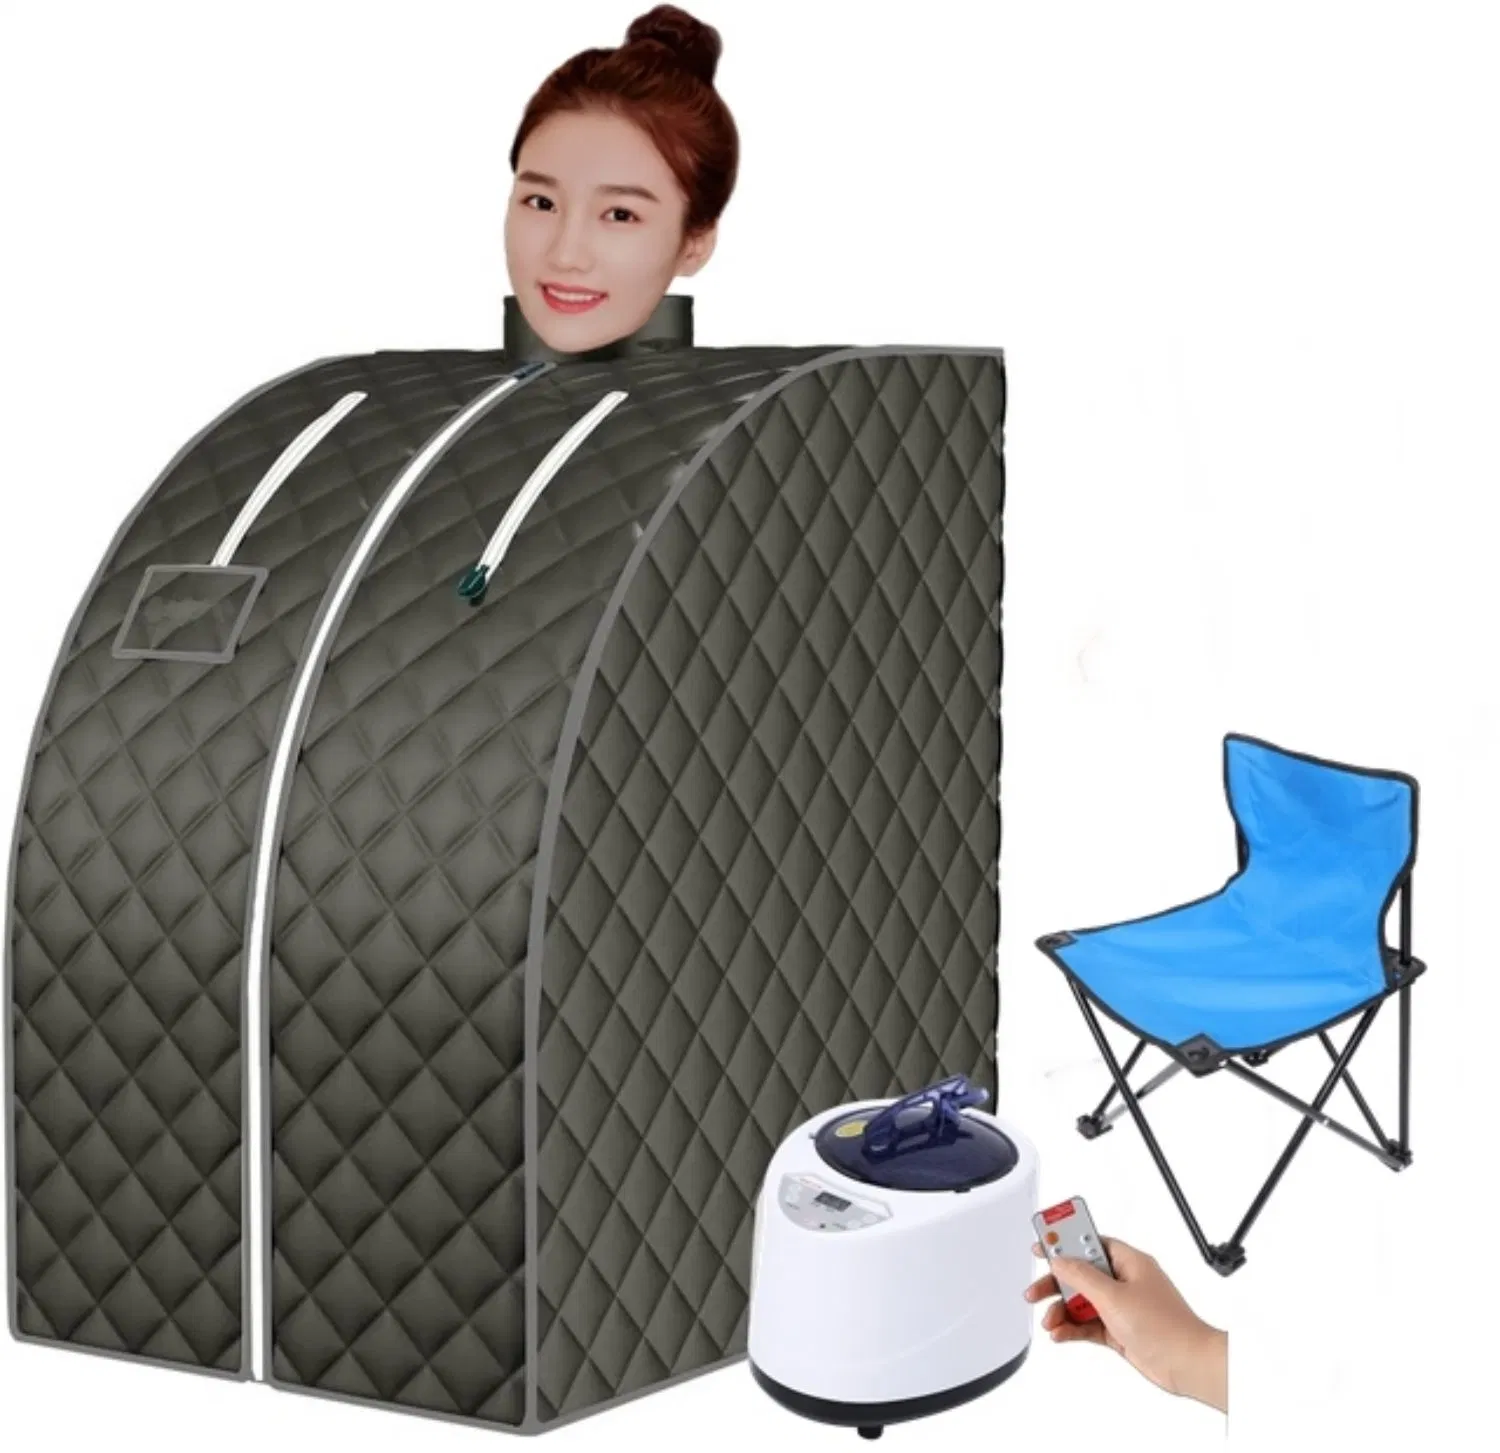 Portable Steam Sauna Full Size Personal Reinforced Zippered Tent